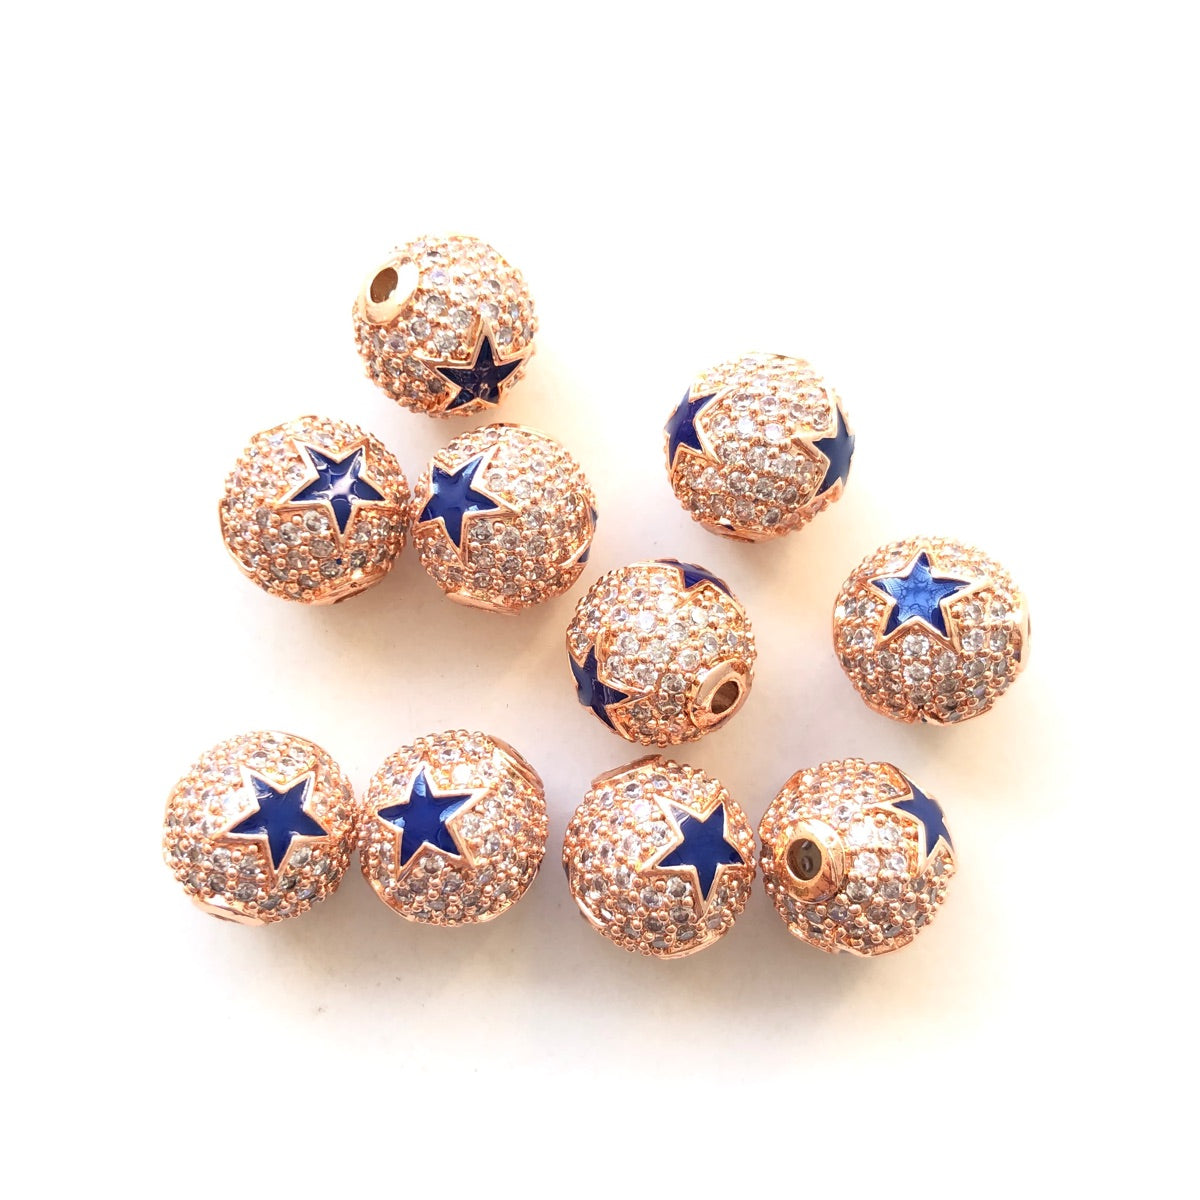 10-20pcs/lot 10mm CZ Paved Cowboys Star Ball Spacers Beads Rose Gold CZ Paved Spacers 10mm Beads American Football Sports Ball Beads New Spacers Arrivals Charms Beads Beyond